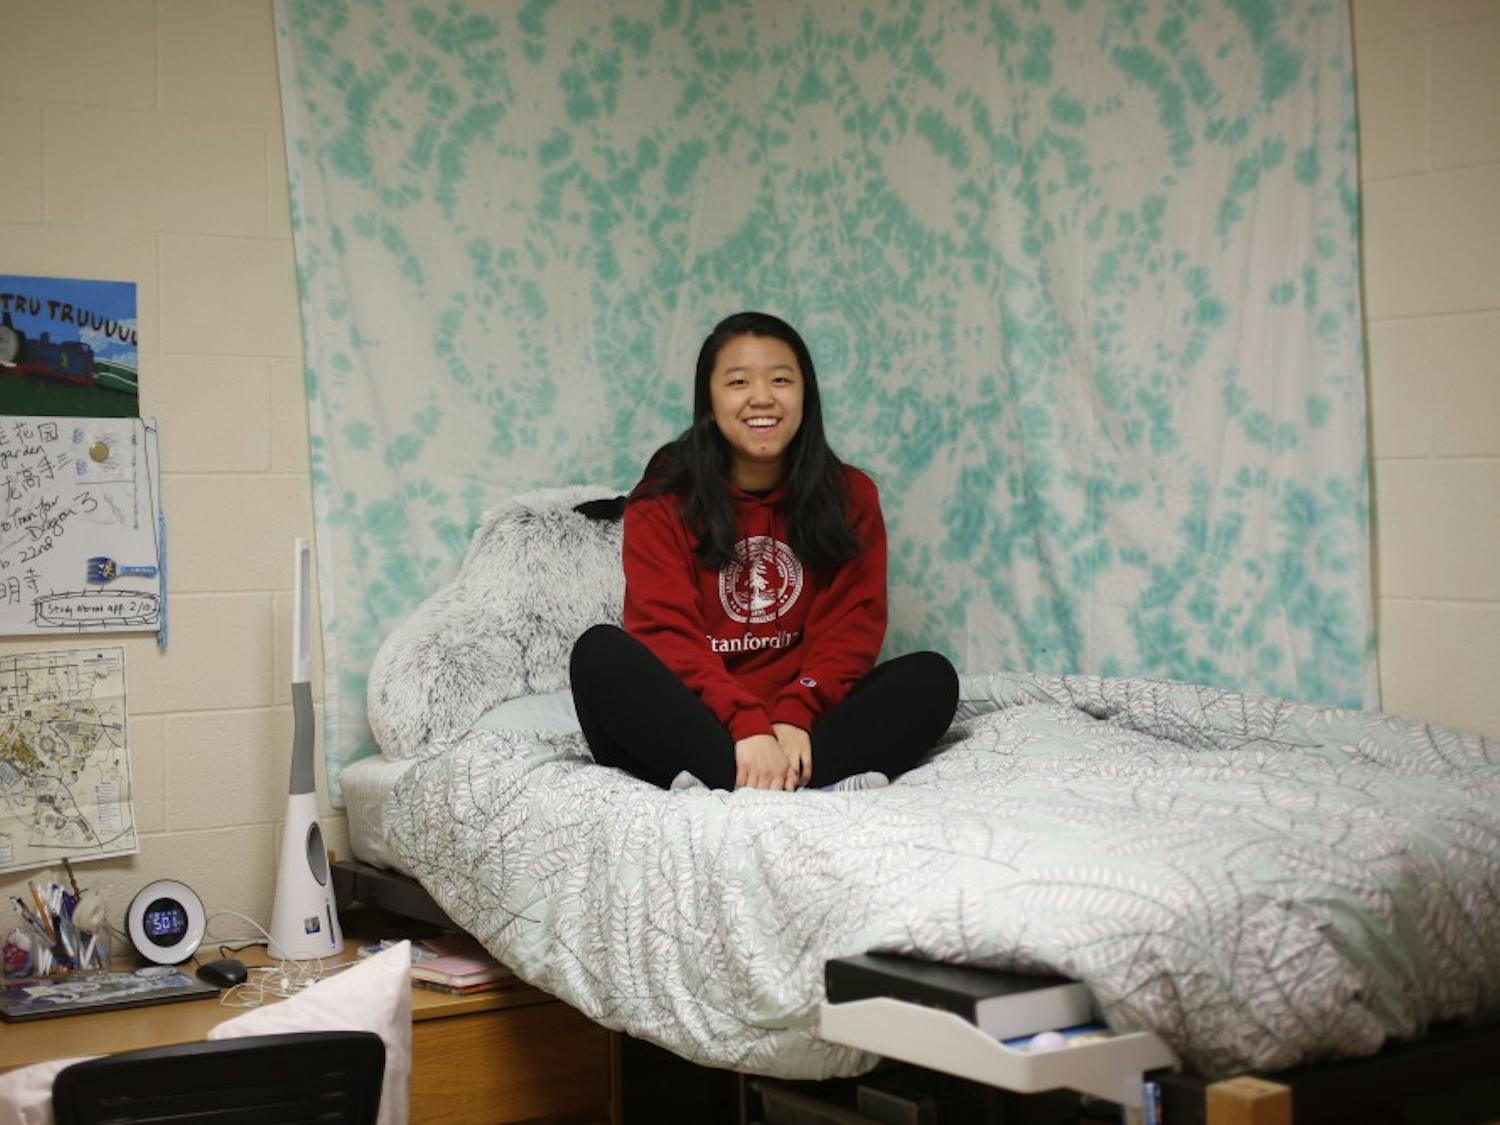 First-year biology major Lucia Wang is a Chinese American student from Apex, N.C. When she first heard about the article from The Chronicle at Duke University regarding a Duke assistant professor who asked Chinese students to speak English while on campus, Wang says she brushed it off at first. After reading comments on the article, she changed her mind. "I don't see how you could think she did nothing wrong," said Wang. "I feel like the way the Duke students acted was right."&nbsp;